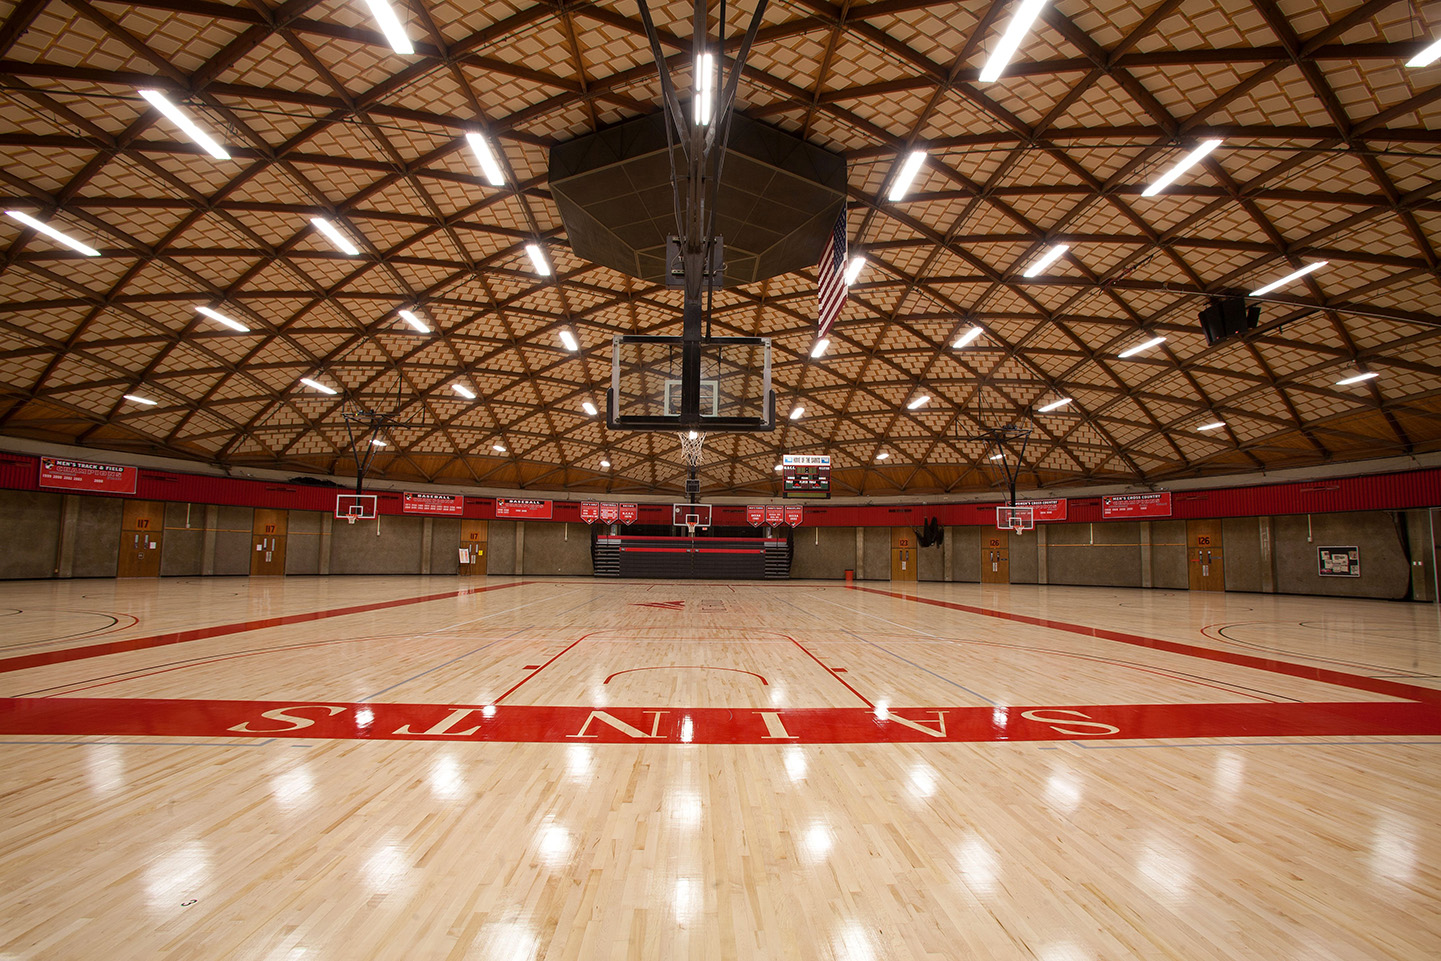 Basketball gym and the paint reads "Saints"